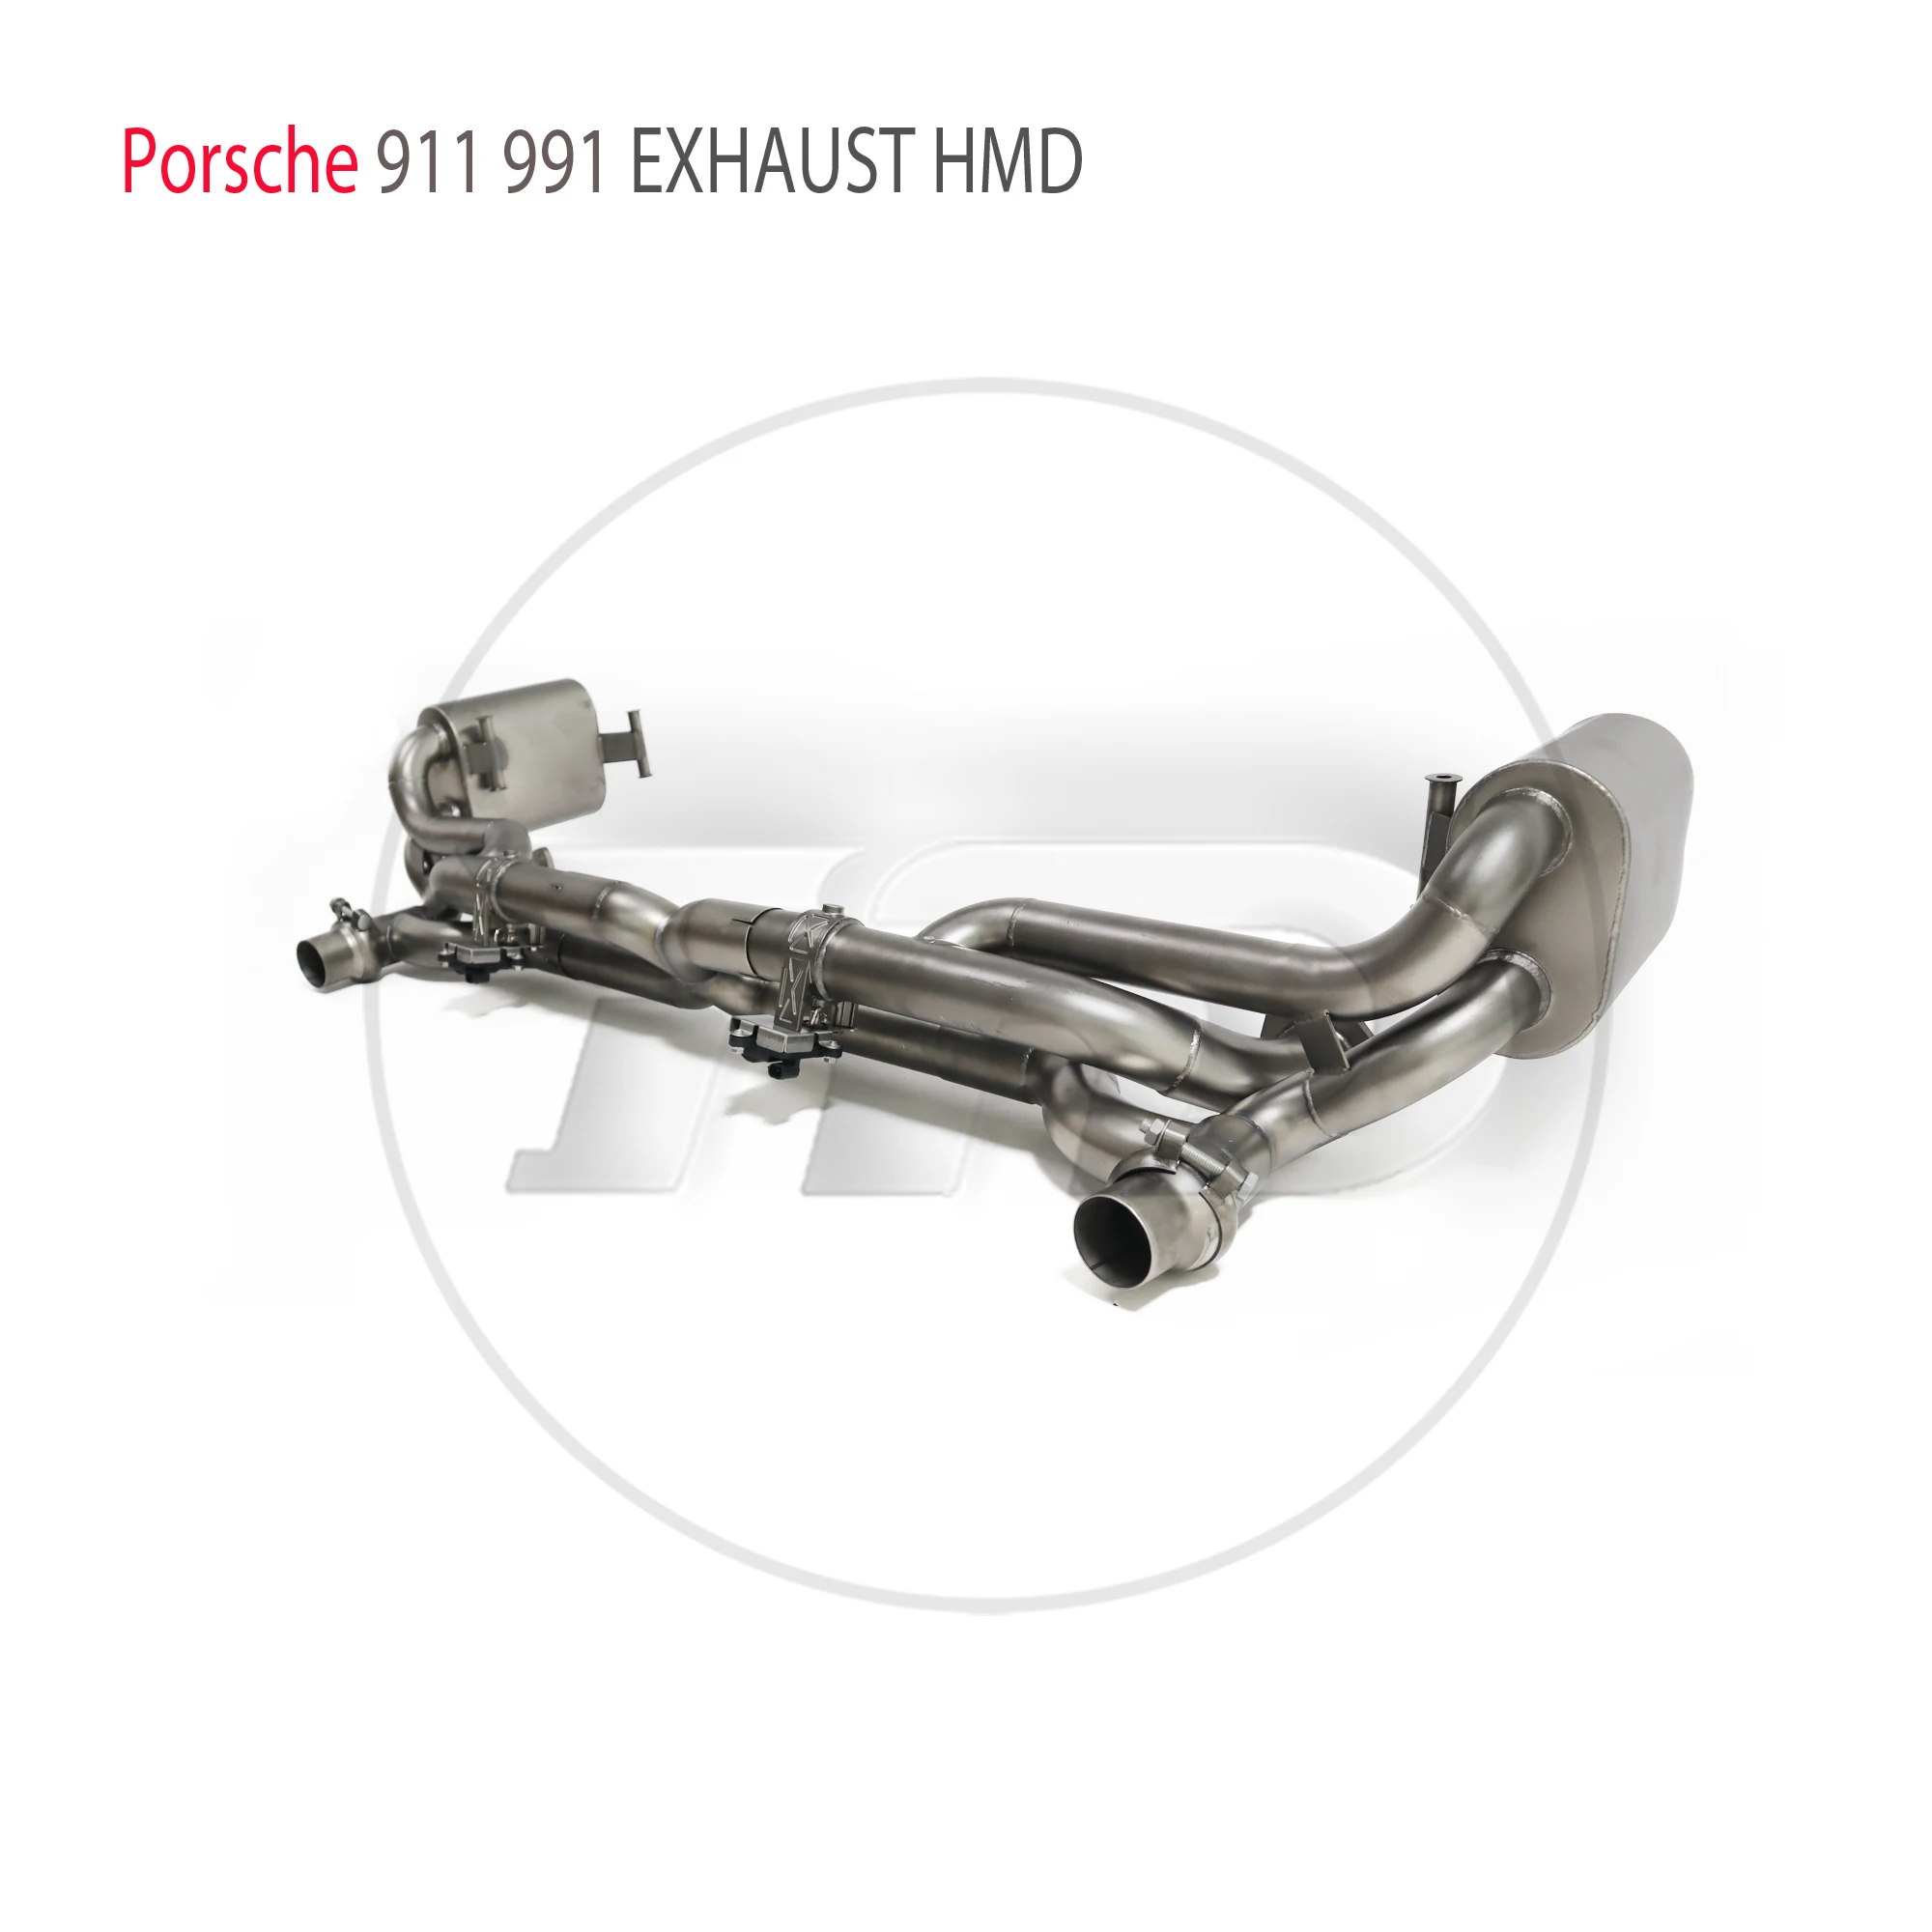 

HMD Stainless Steel Exhaust System Performance Catback for Porsche 911 991.1 991.2 Carrera With 991 GT2 RS Style Body Kit